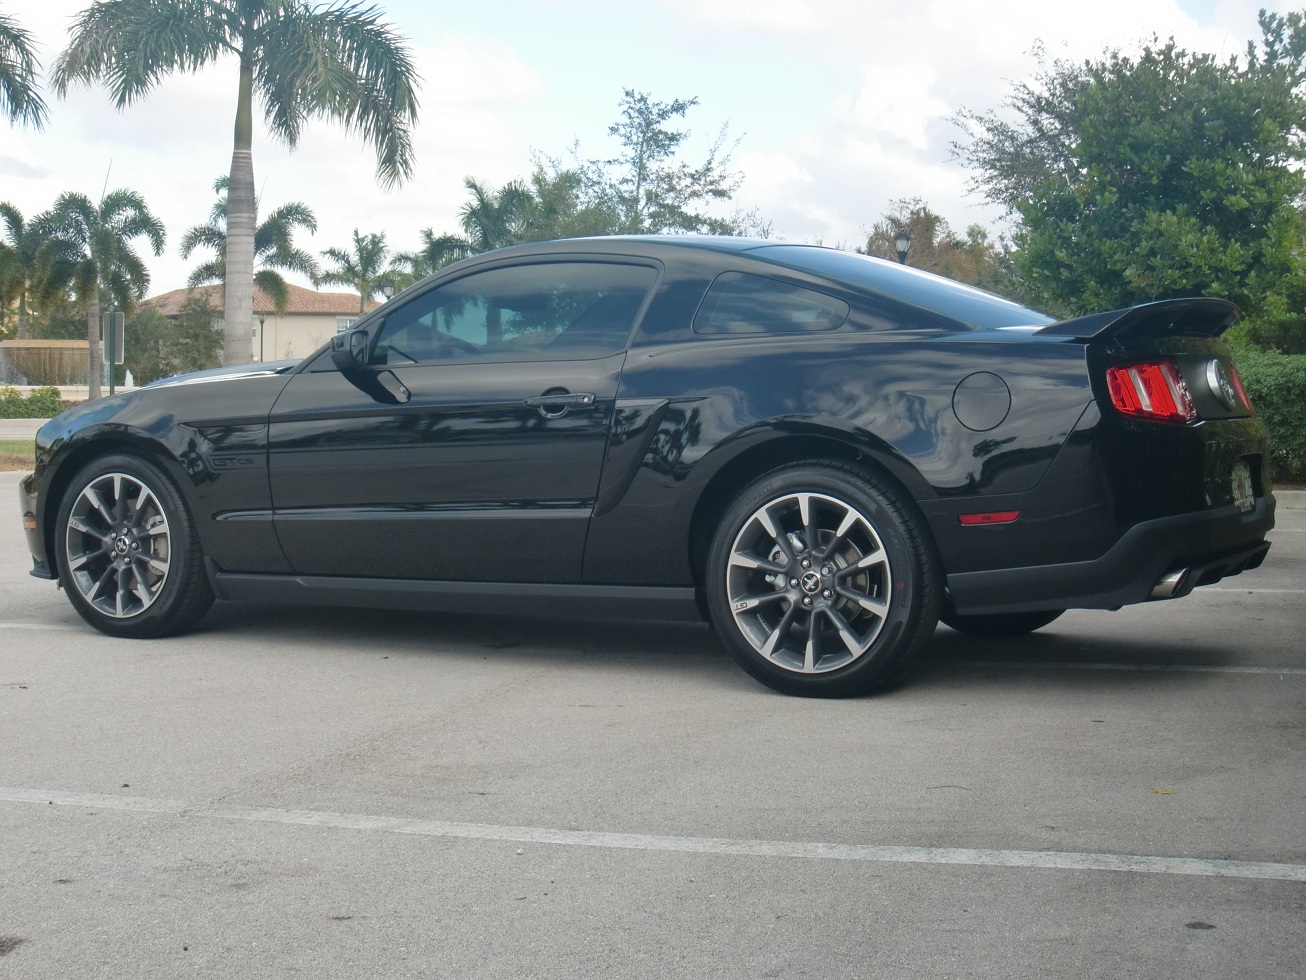 2012 Ford mustang gt modifications